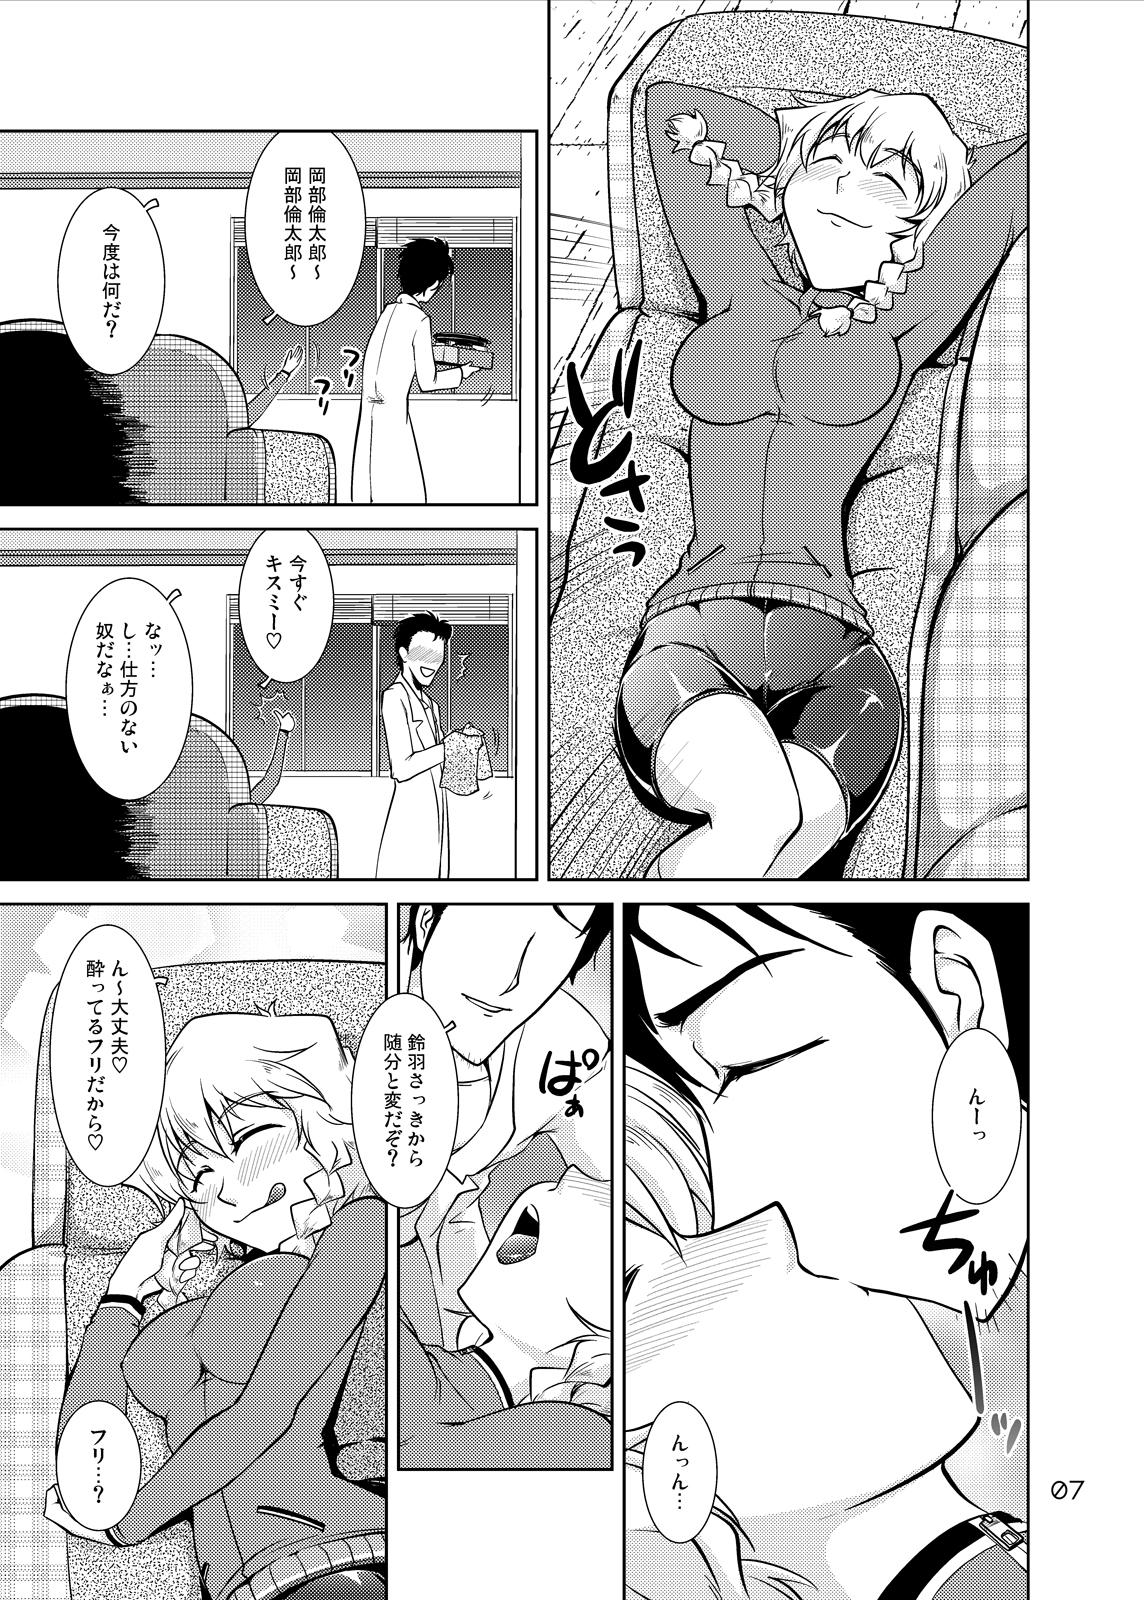 Tight Pussy Spats;Gate PART6 Pokon's Fatality - Steinsgate Gay Friend - Page 6